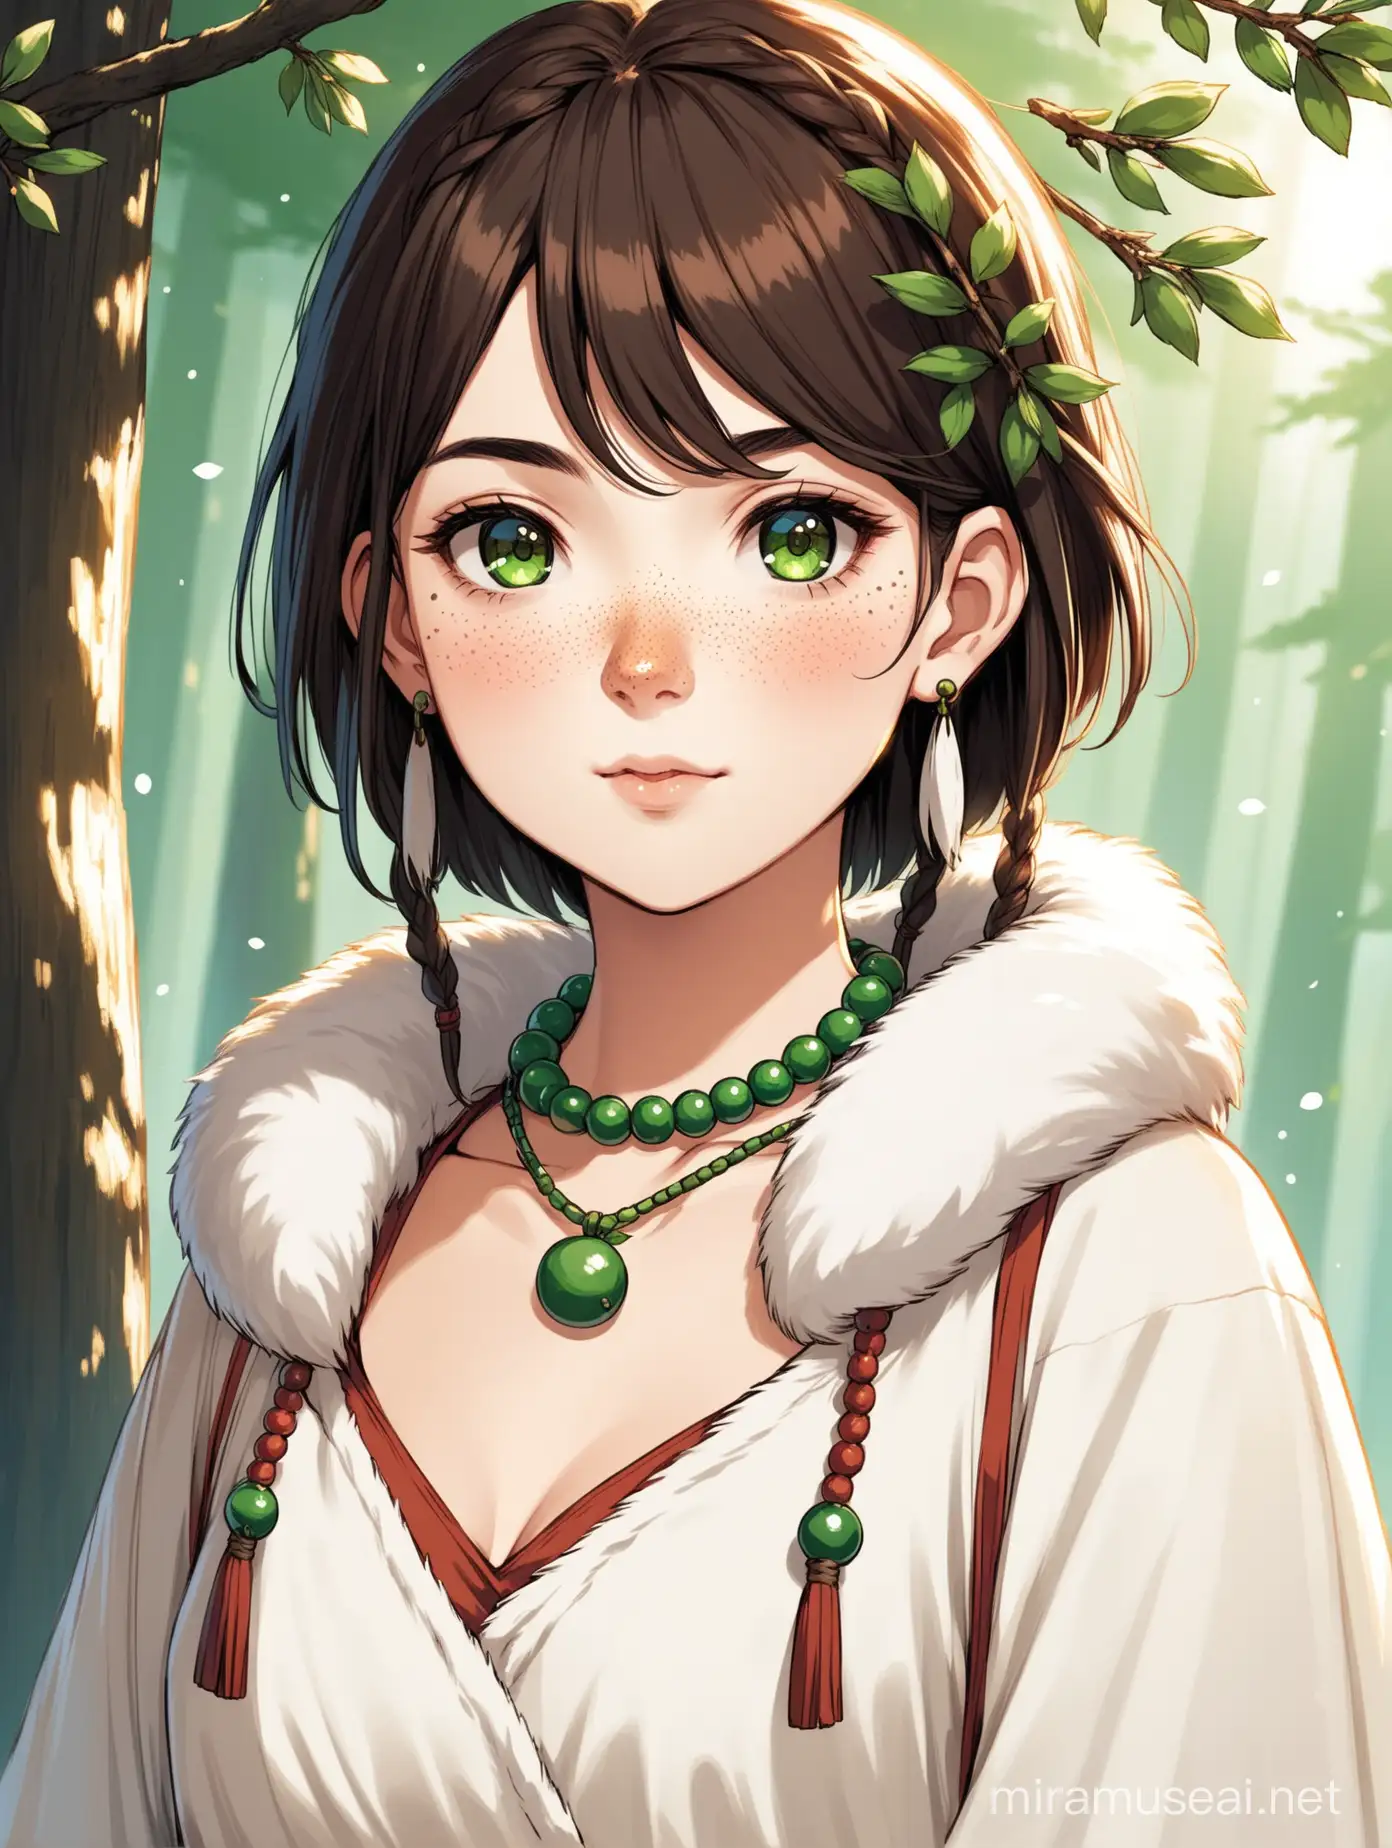 30-year-old woman with dark green eyes, she has choppy short hair  in the front with shorter length hair in the back with dark brown hair  with a little freckles. A juniper tree necklace. 
Her outfit is inspired by Princess Mononoke.  Her outfit consists of white furs. She has no markings on ger face.   SHE HAS DARK BROWN HAIR. She has a greek nose. Her face is round. She is kinda pale. She has 2 short braids that are different lengths in the front. She has rosy cheeks. She has a 1 dangly earring that is a leaf. She has beads and little leaves in her hair.